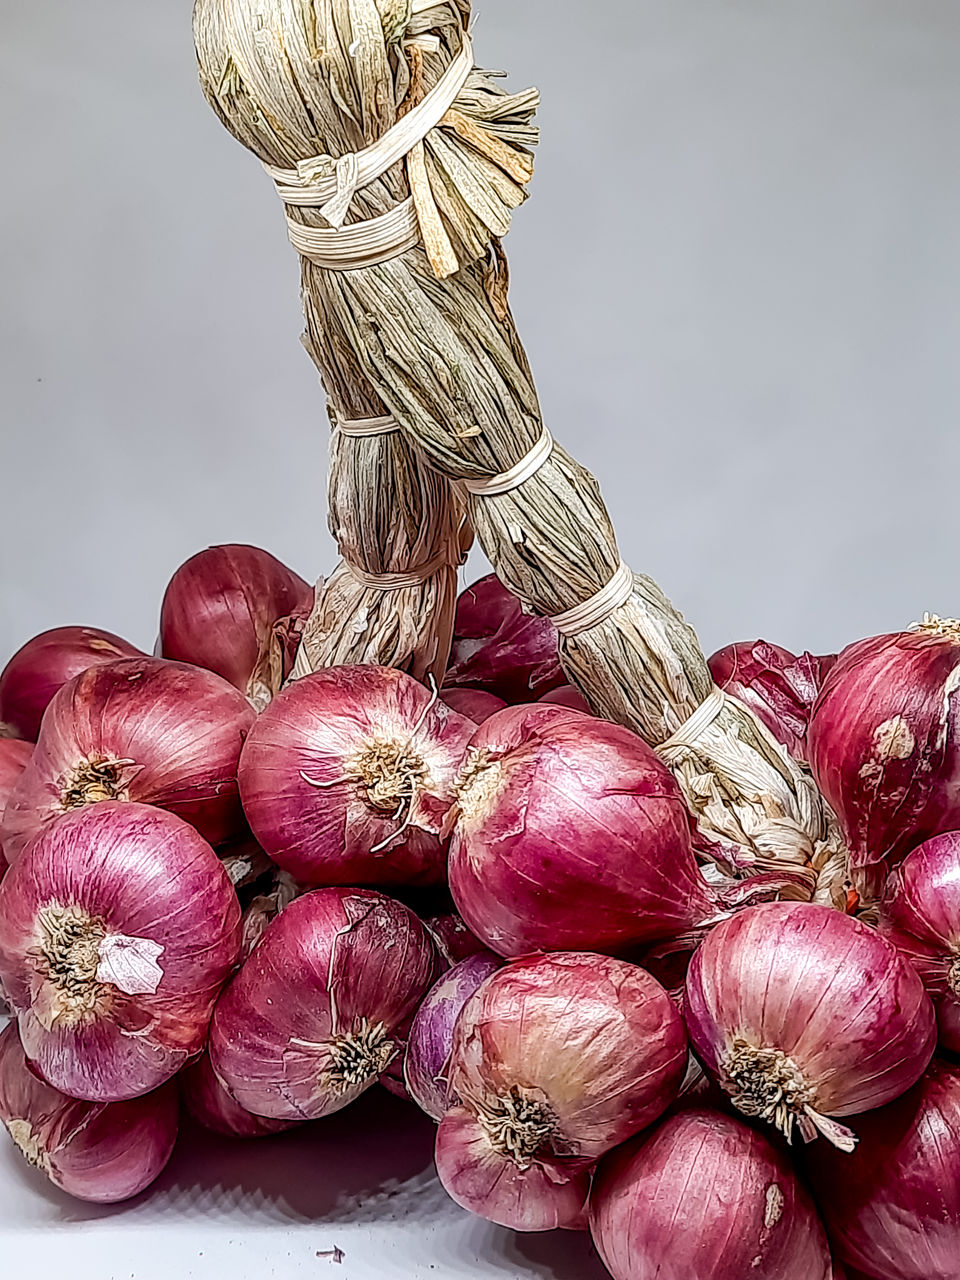 food and drink, food, produce, freshness, vegetable, healthy eating, wellbeing, still life, plant, shallot, flower, ingredient, no people, studio shot, indoors, garlic, large group of objects, organic, onion, gray background, abundance, spice, raw food, close-up, garlic bulb, red onion